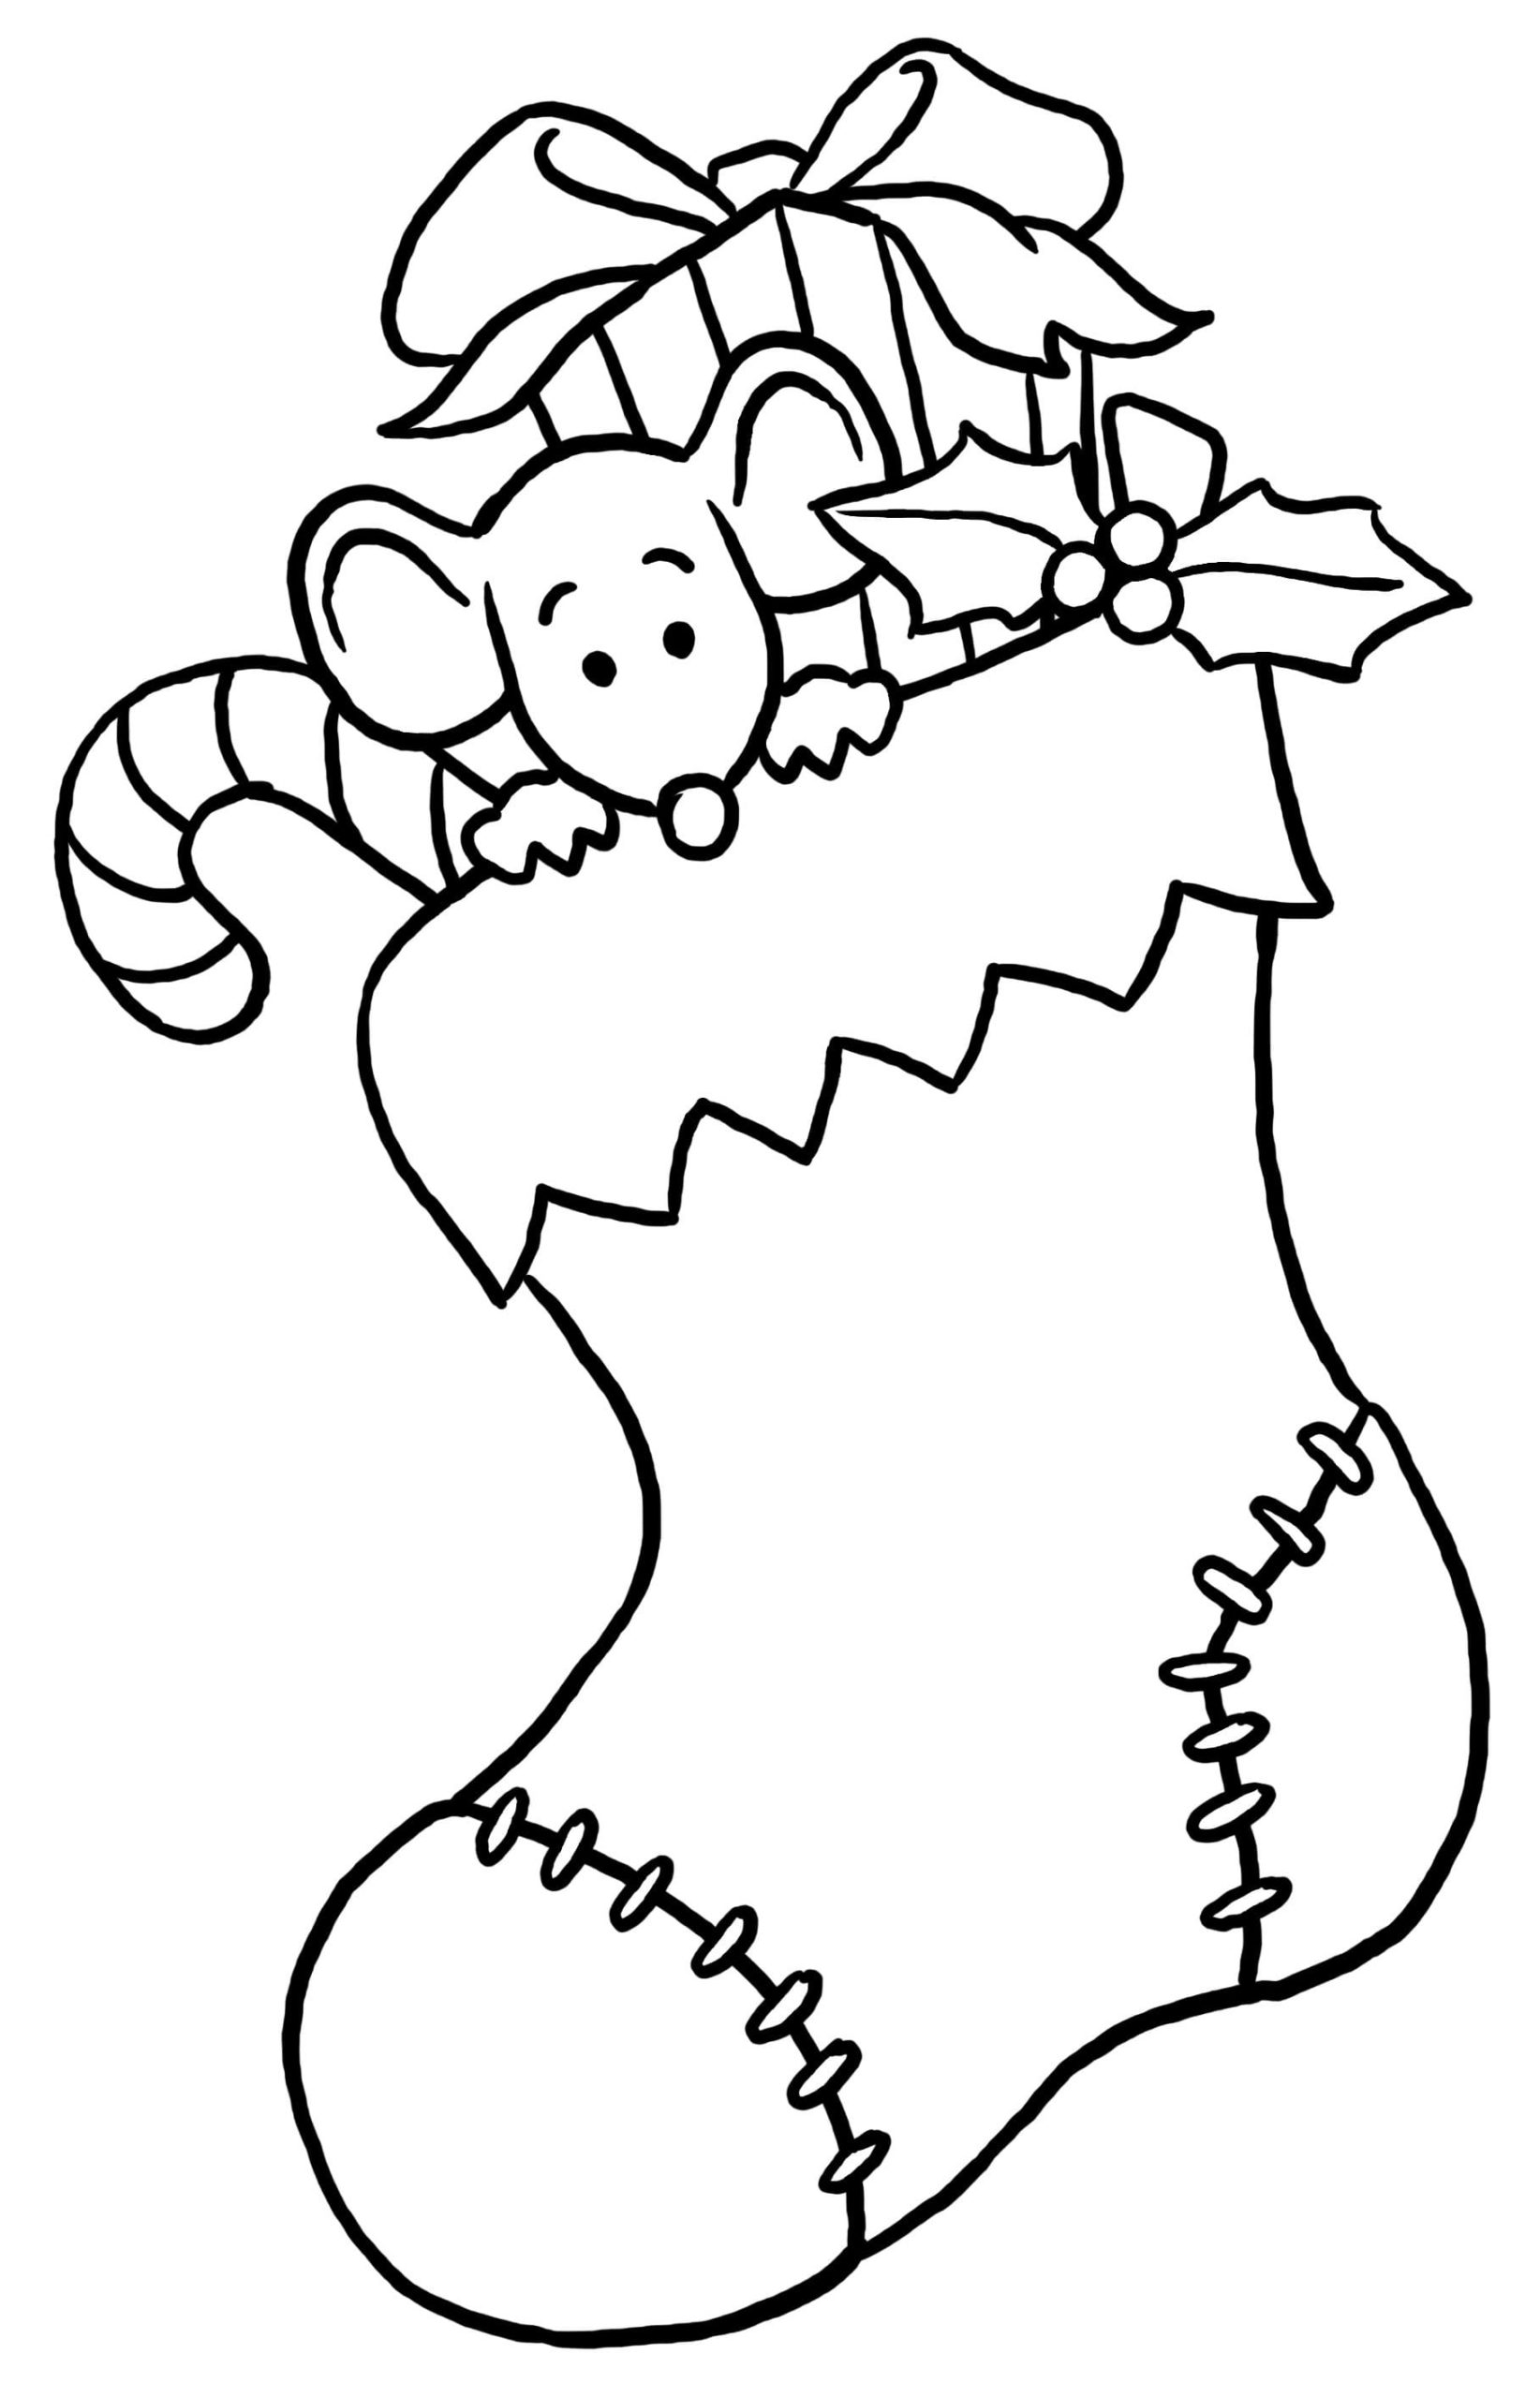 New Year And Christmas With A Boot Coloring Page